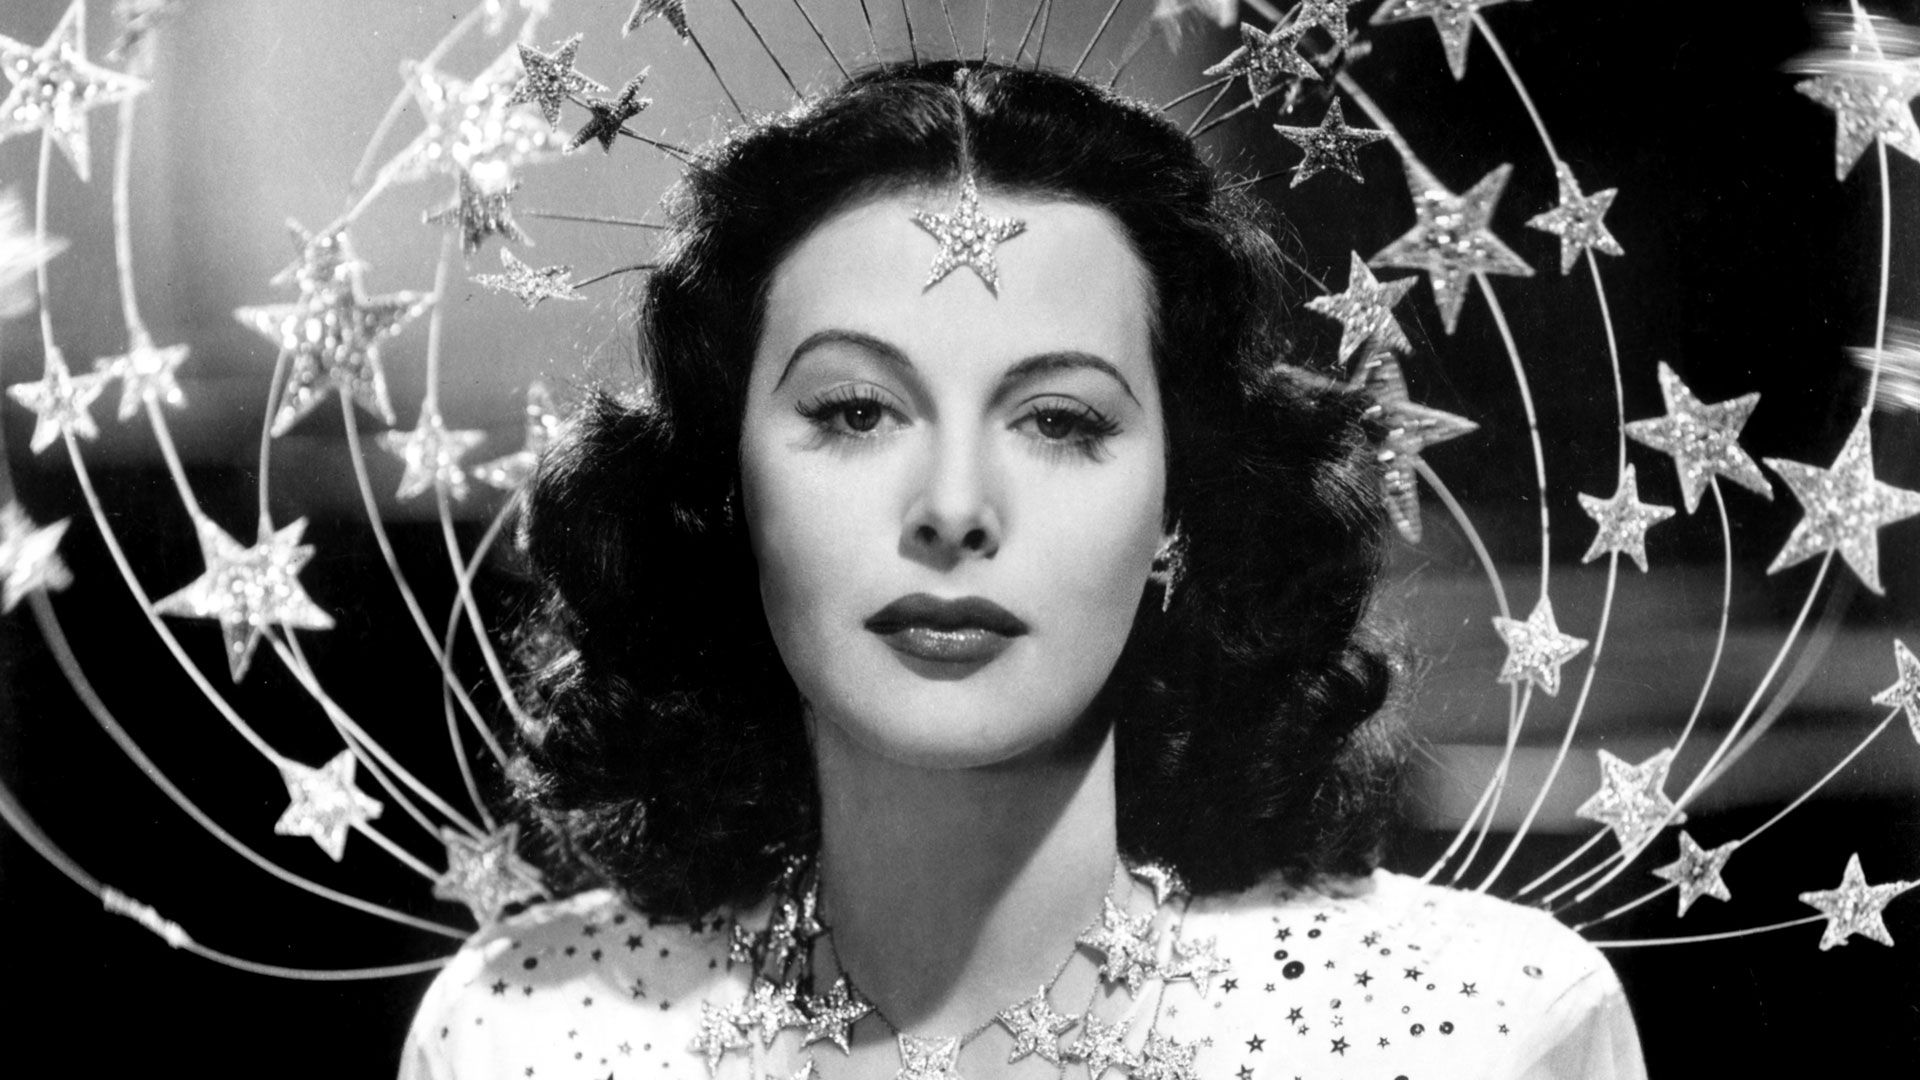 Bombshell: The Hedy Lamarr Story. How the Pianola Played a Part in Hedy Lamarr's Invention. Blog